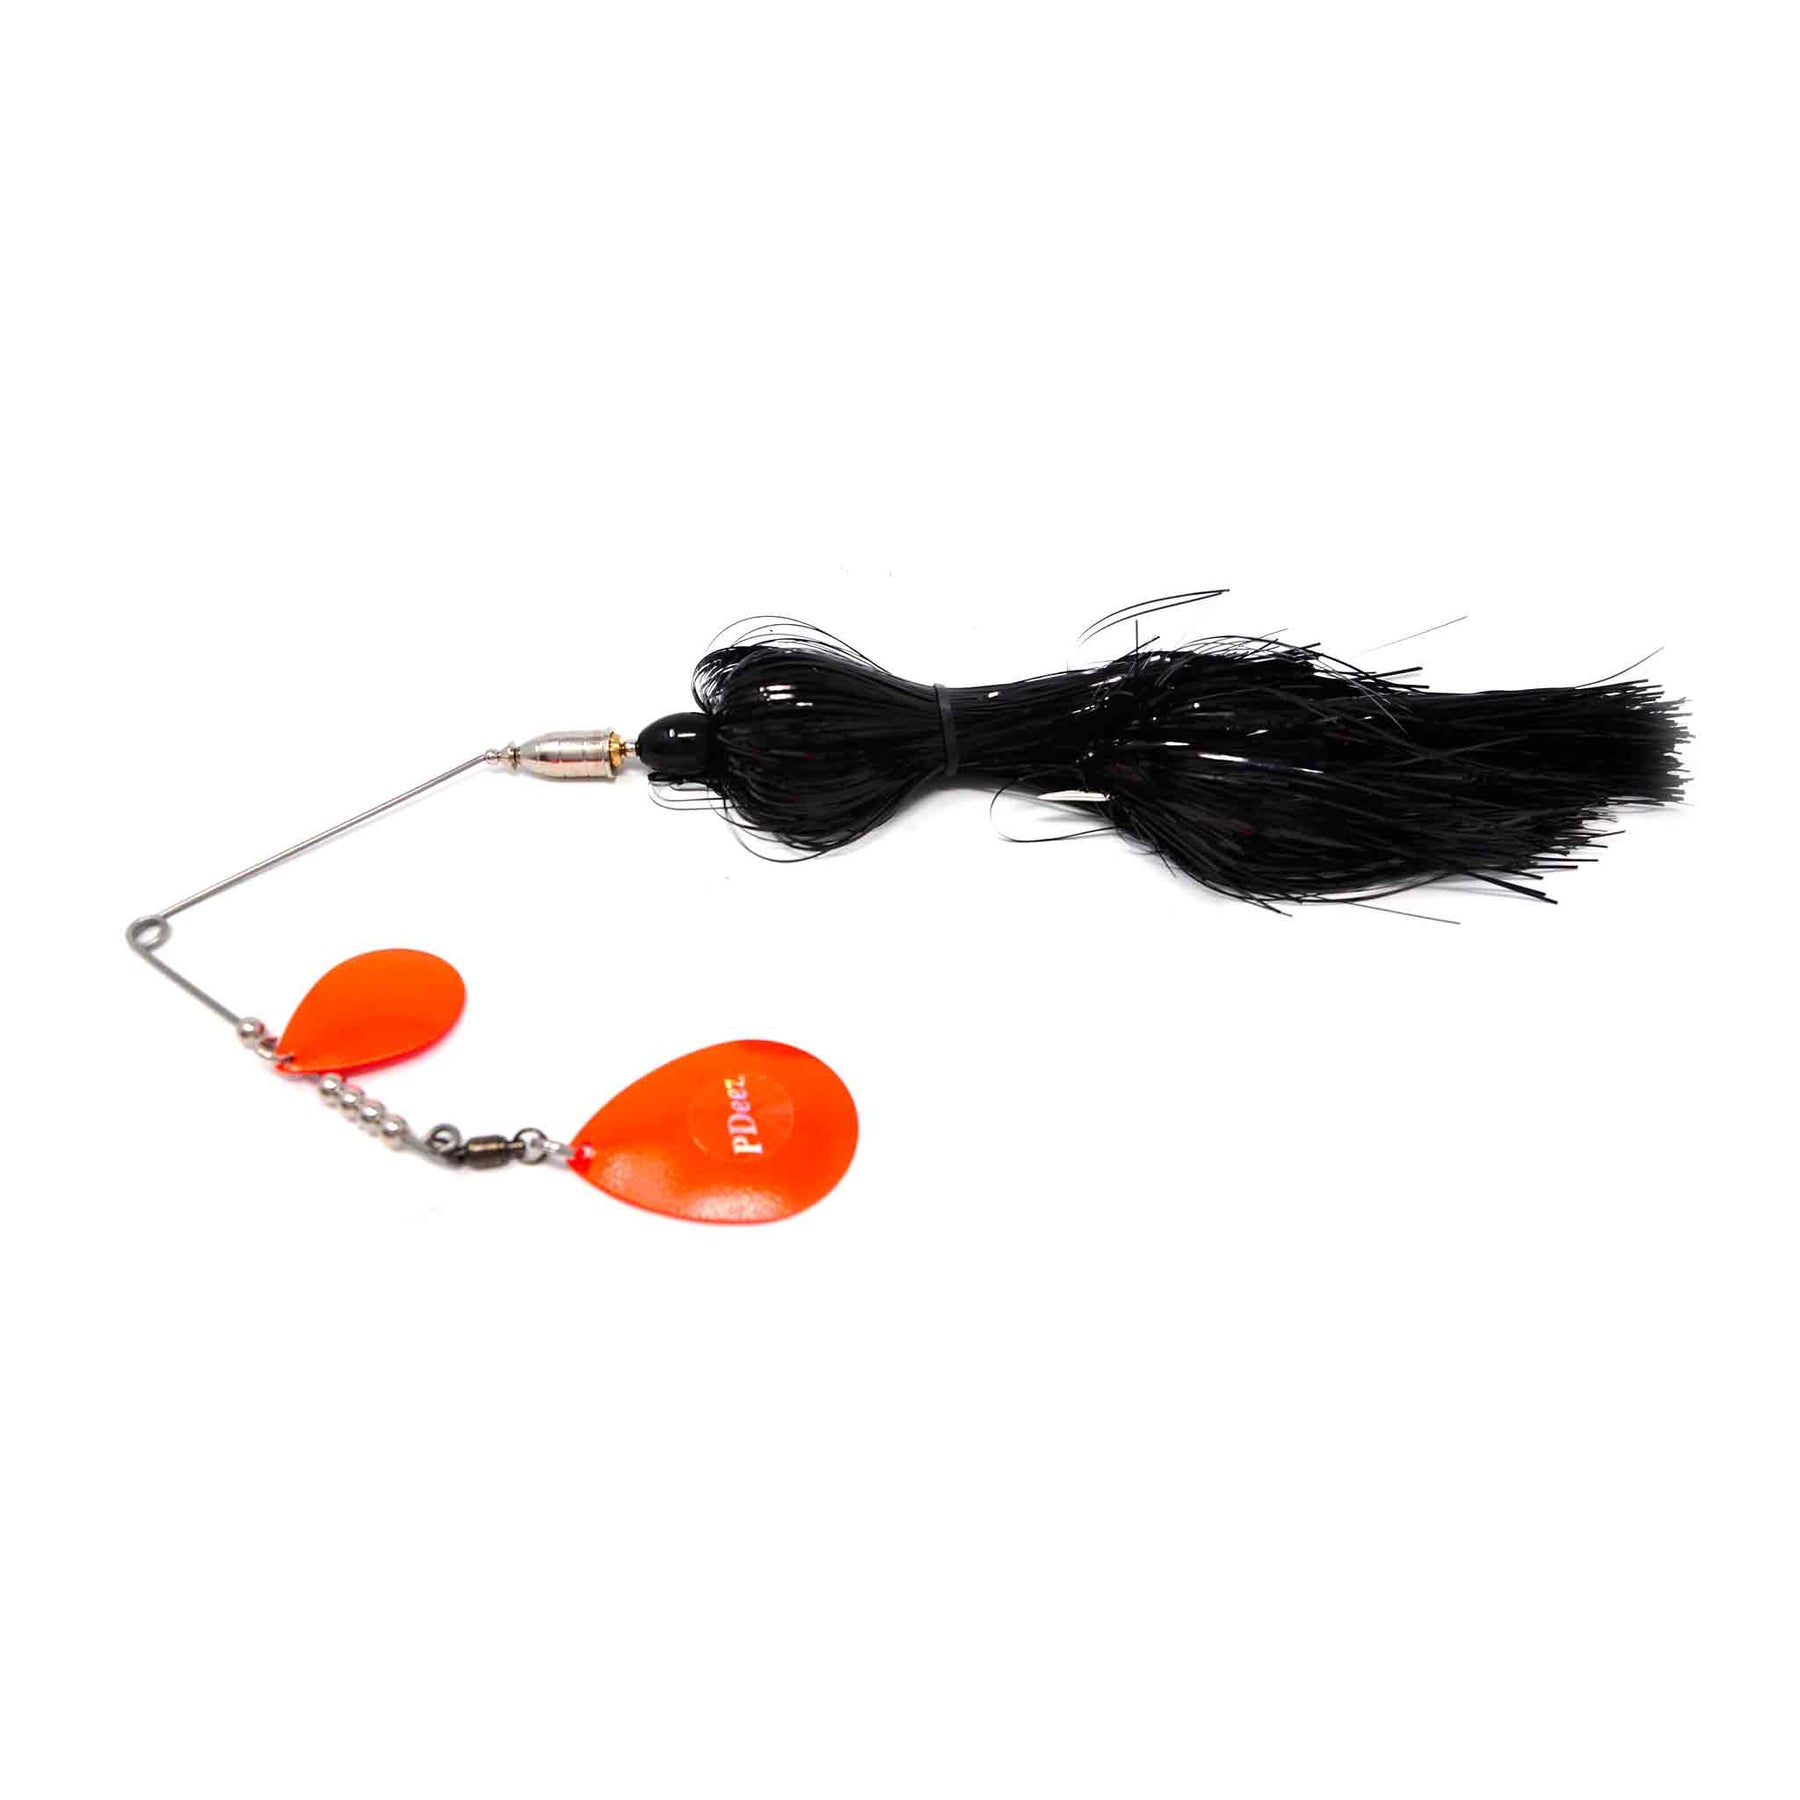 View of Spinnerbaits PDeez Bell Casting Spinnerbait Black / Orange available at EZOKO Pike and Musky Shop